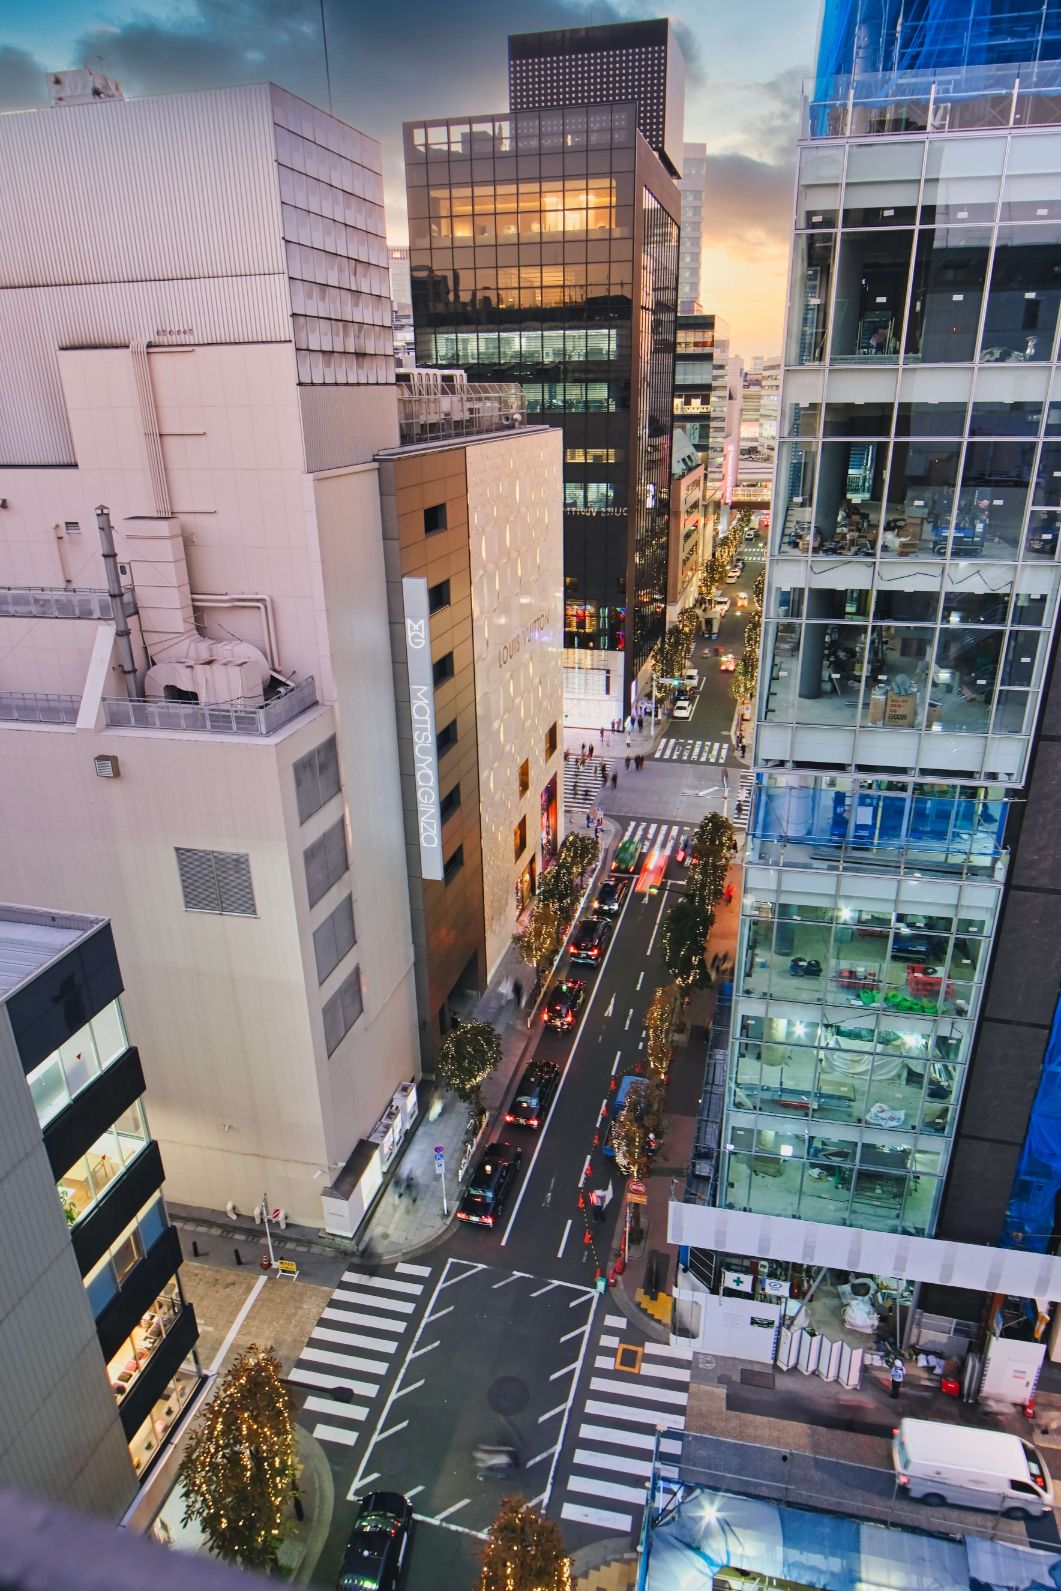 This photography spot is located in Ginza. In a up town area like Ginza it is not easy to find a spot where you can take a picture of the street from this angle.